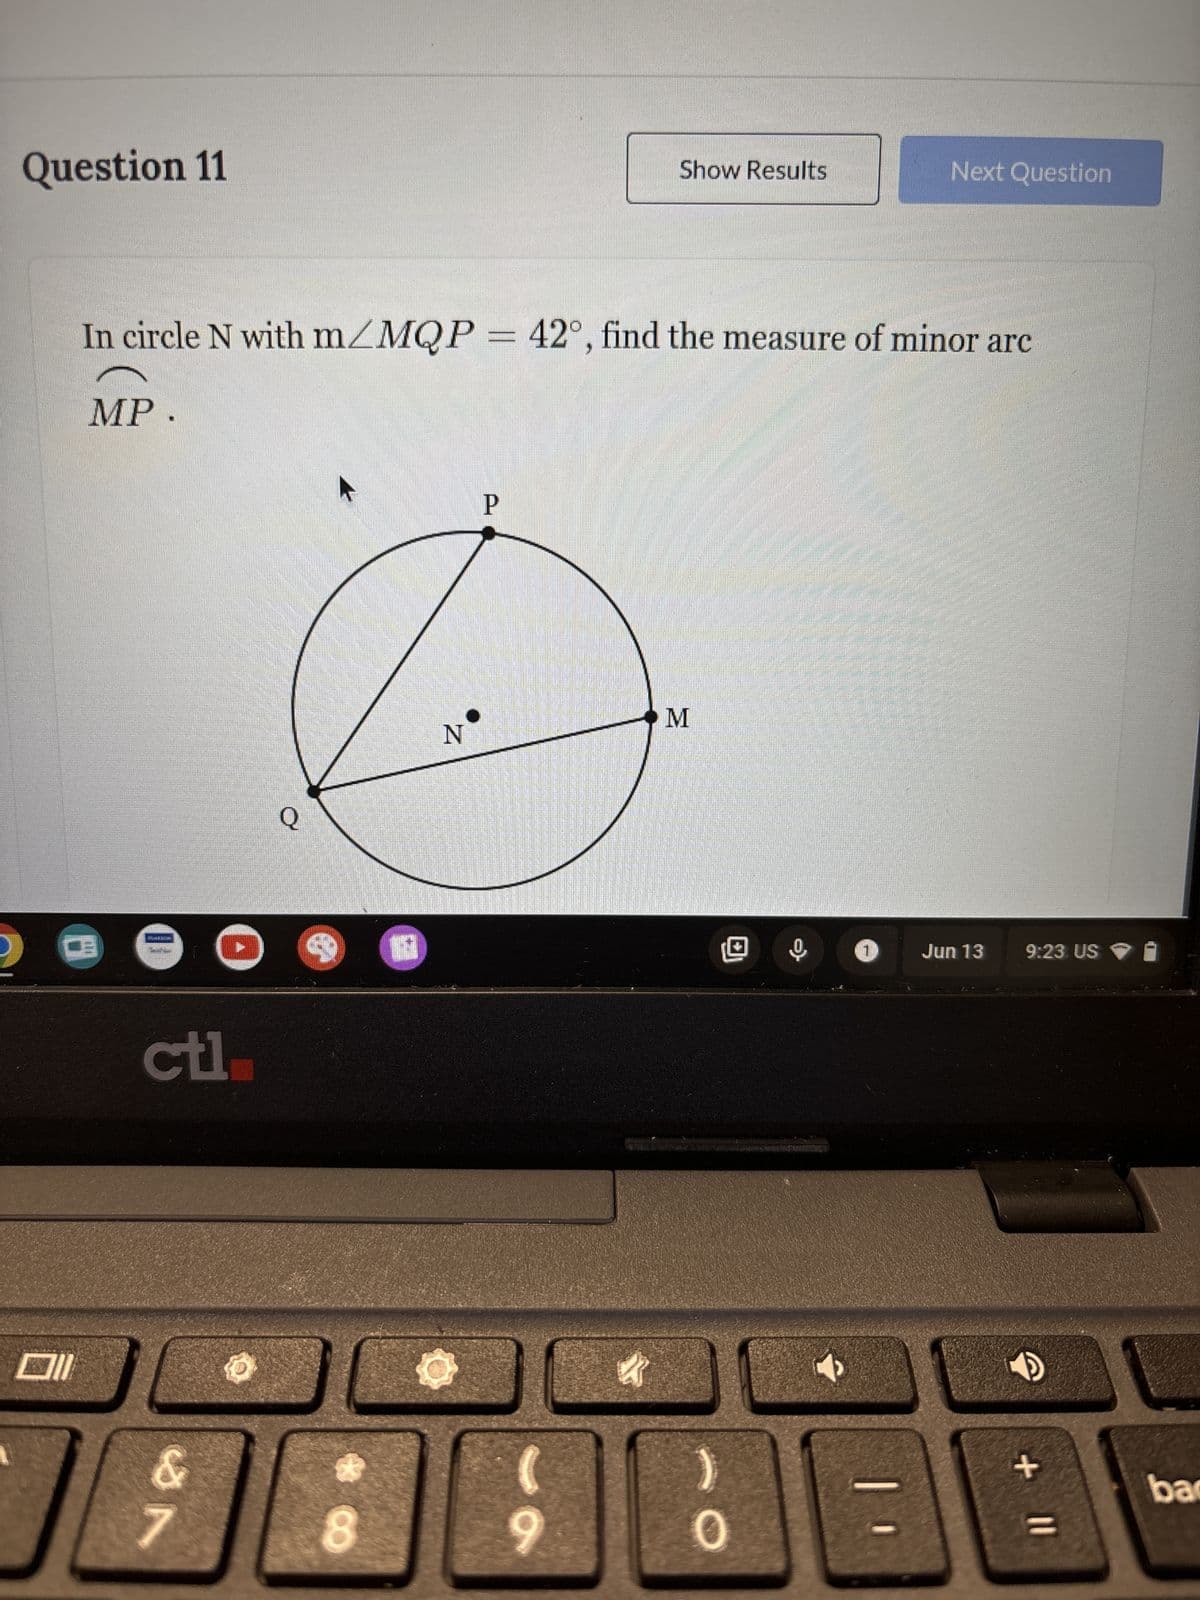 Question 11
Show Results
Next Question
In circle N with m/MQP = 42°, find the measure of minor arc
MP.
ctl
19
Q
N
P
M
8
0
Jun 13
9:23. US
11 +
bac